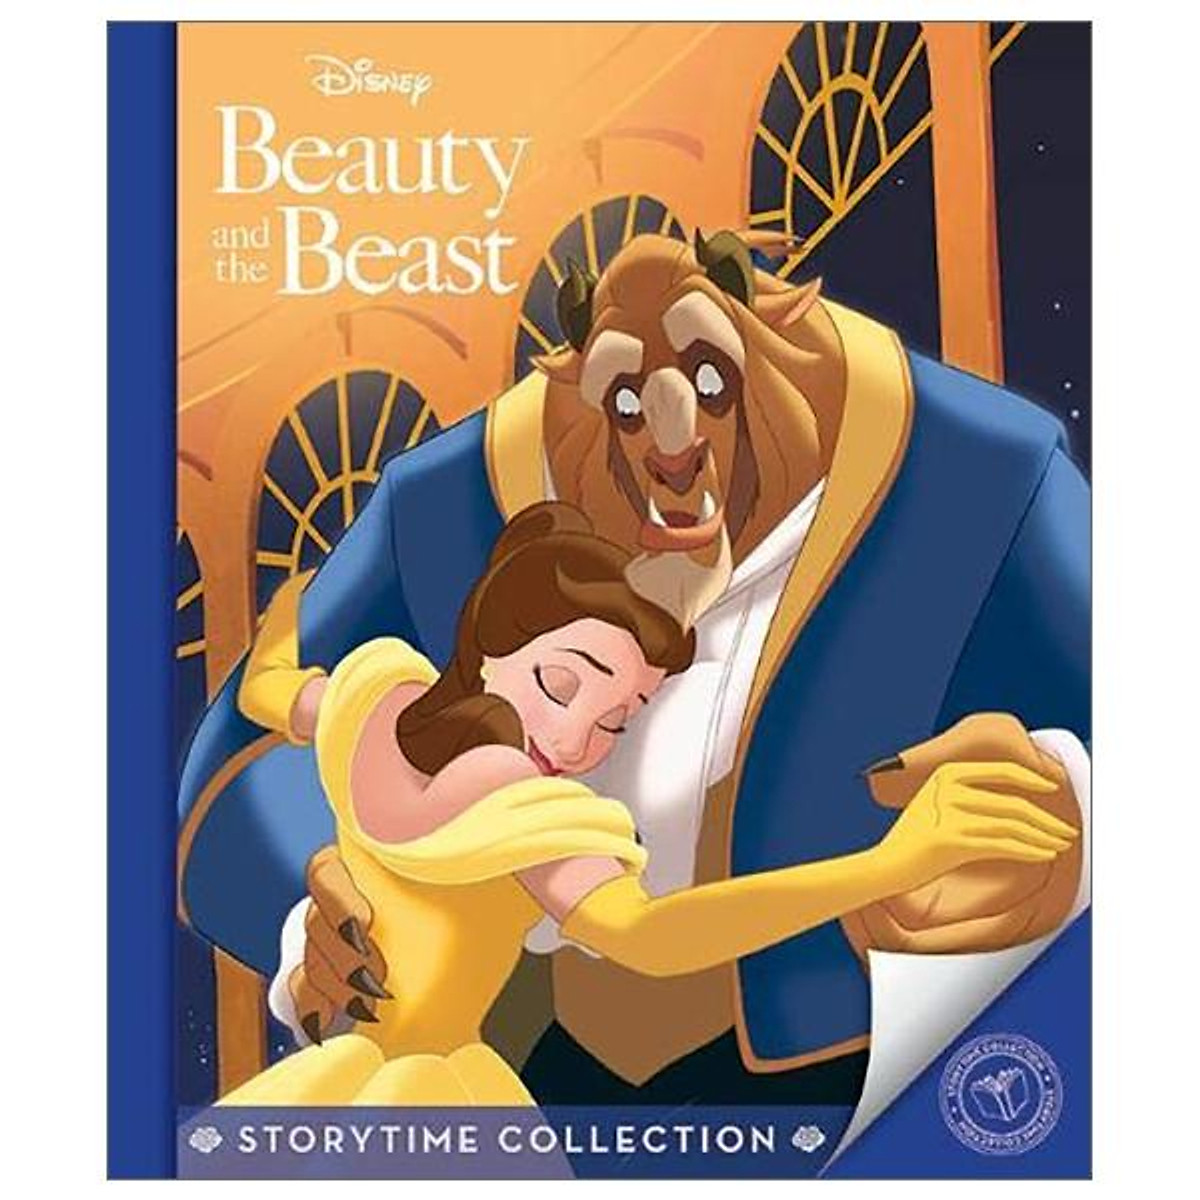 Disney Princess - Beauty and the Beast: Storytime Collection (Storytime Collection Disney)